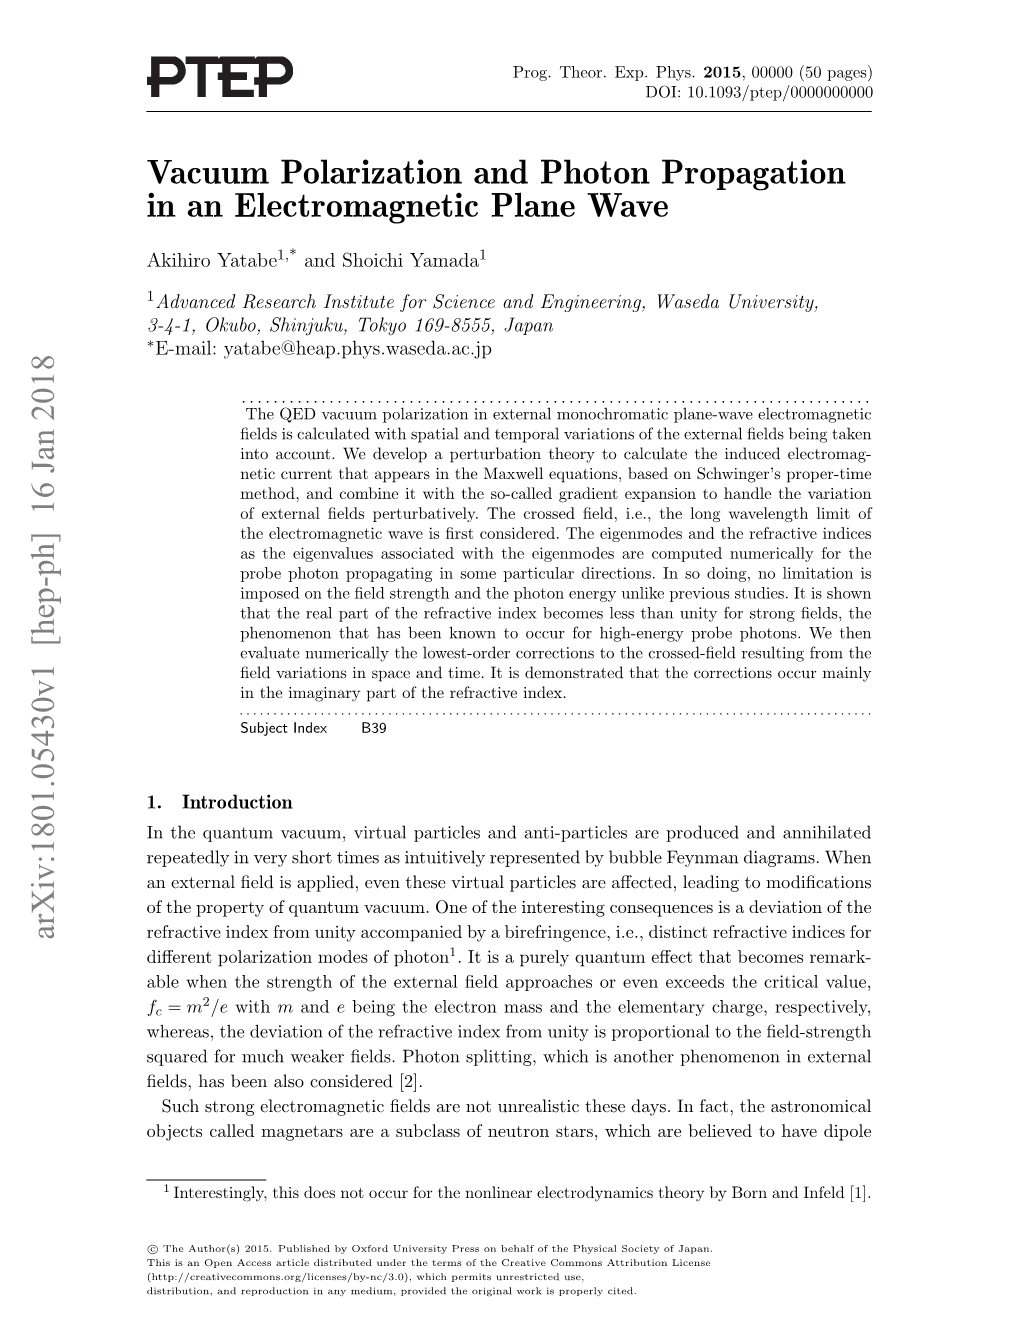 Vacuum Polarization and Photon Propagation in an Electromagnetic Plane Wave